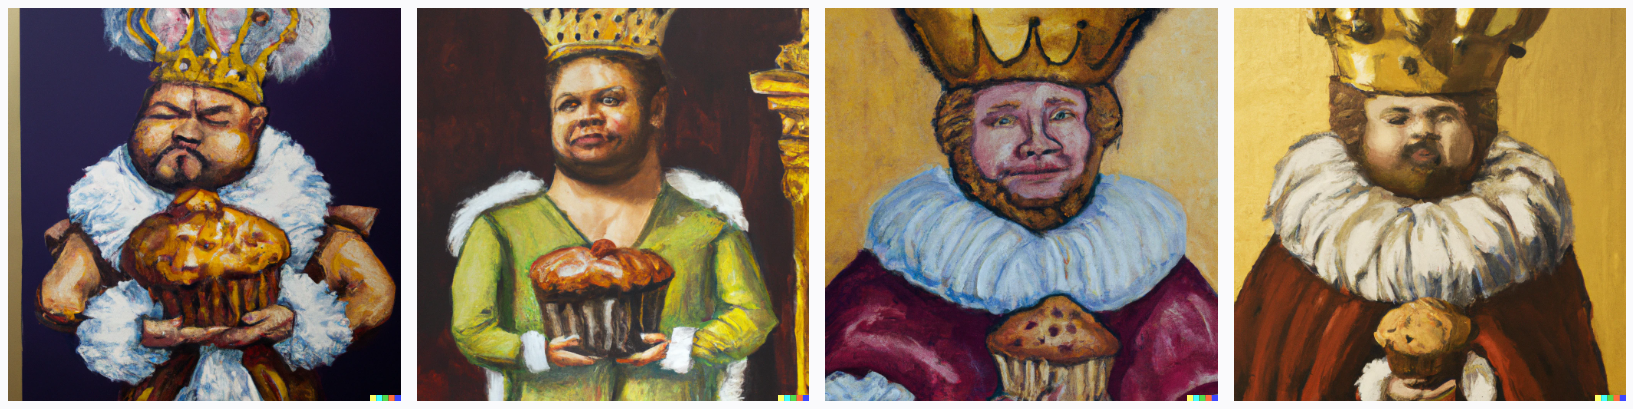 muffin man holding a large muffin wearing a crown lavish well-preserved oil painting with gold